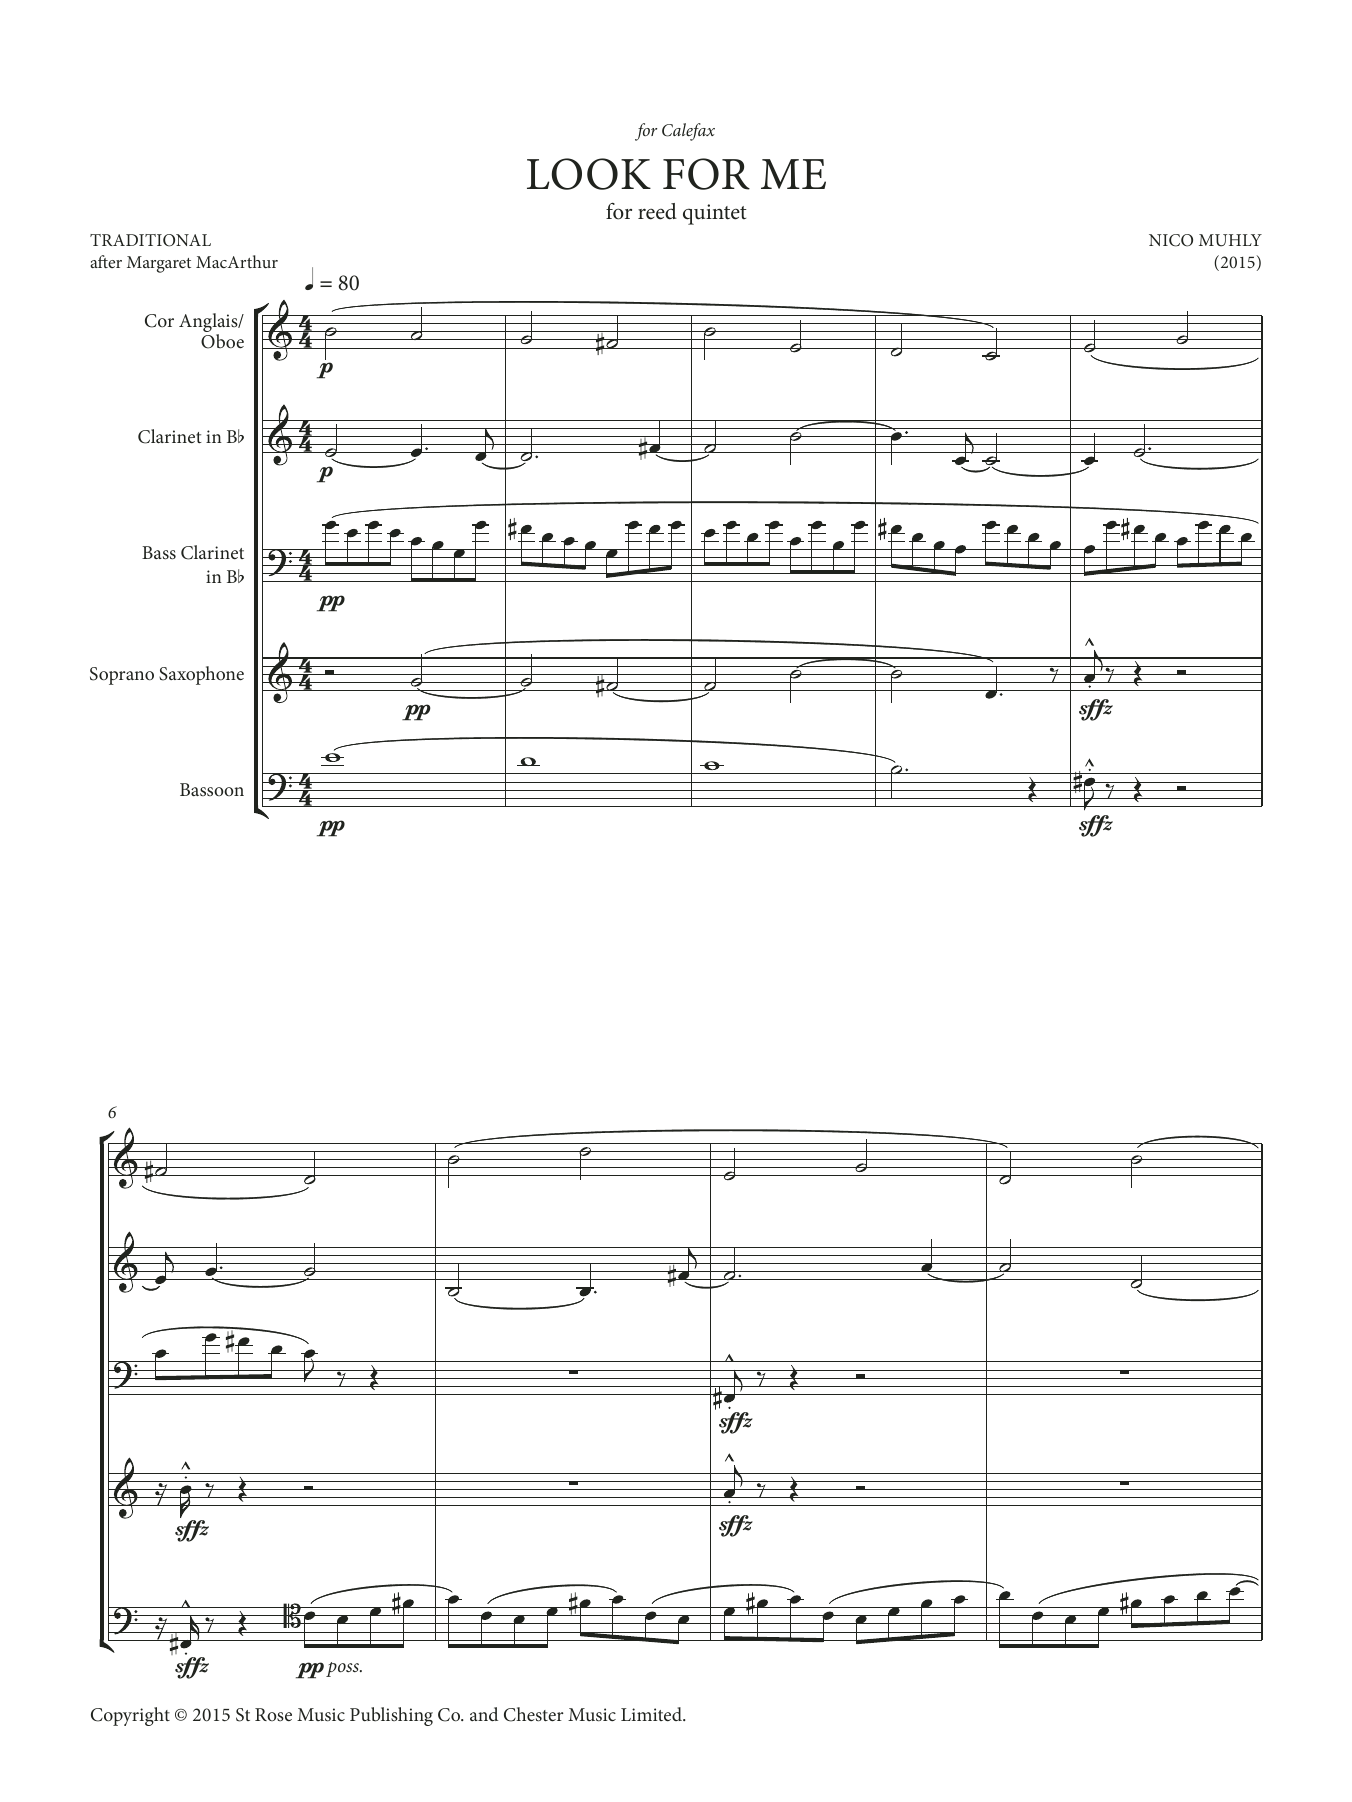 Look For Me (Score and Parts) (Performance Ensemble) von Nico Muhly